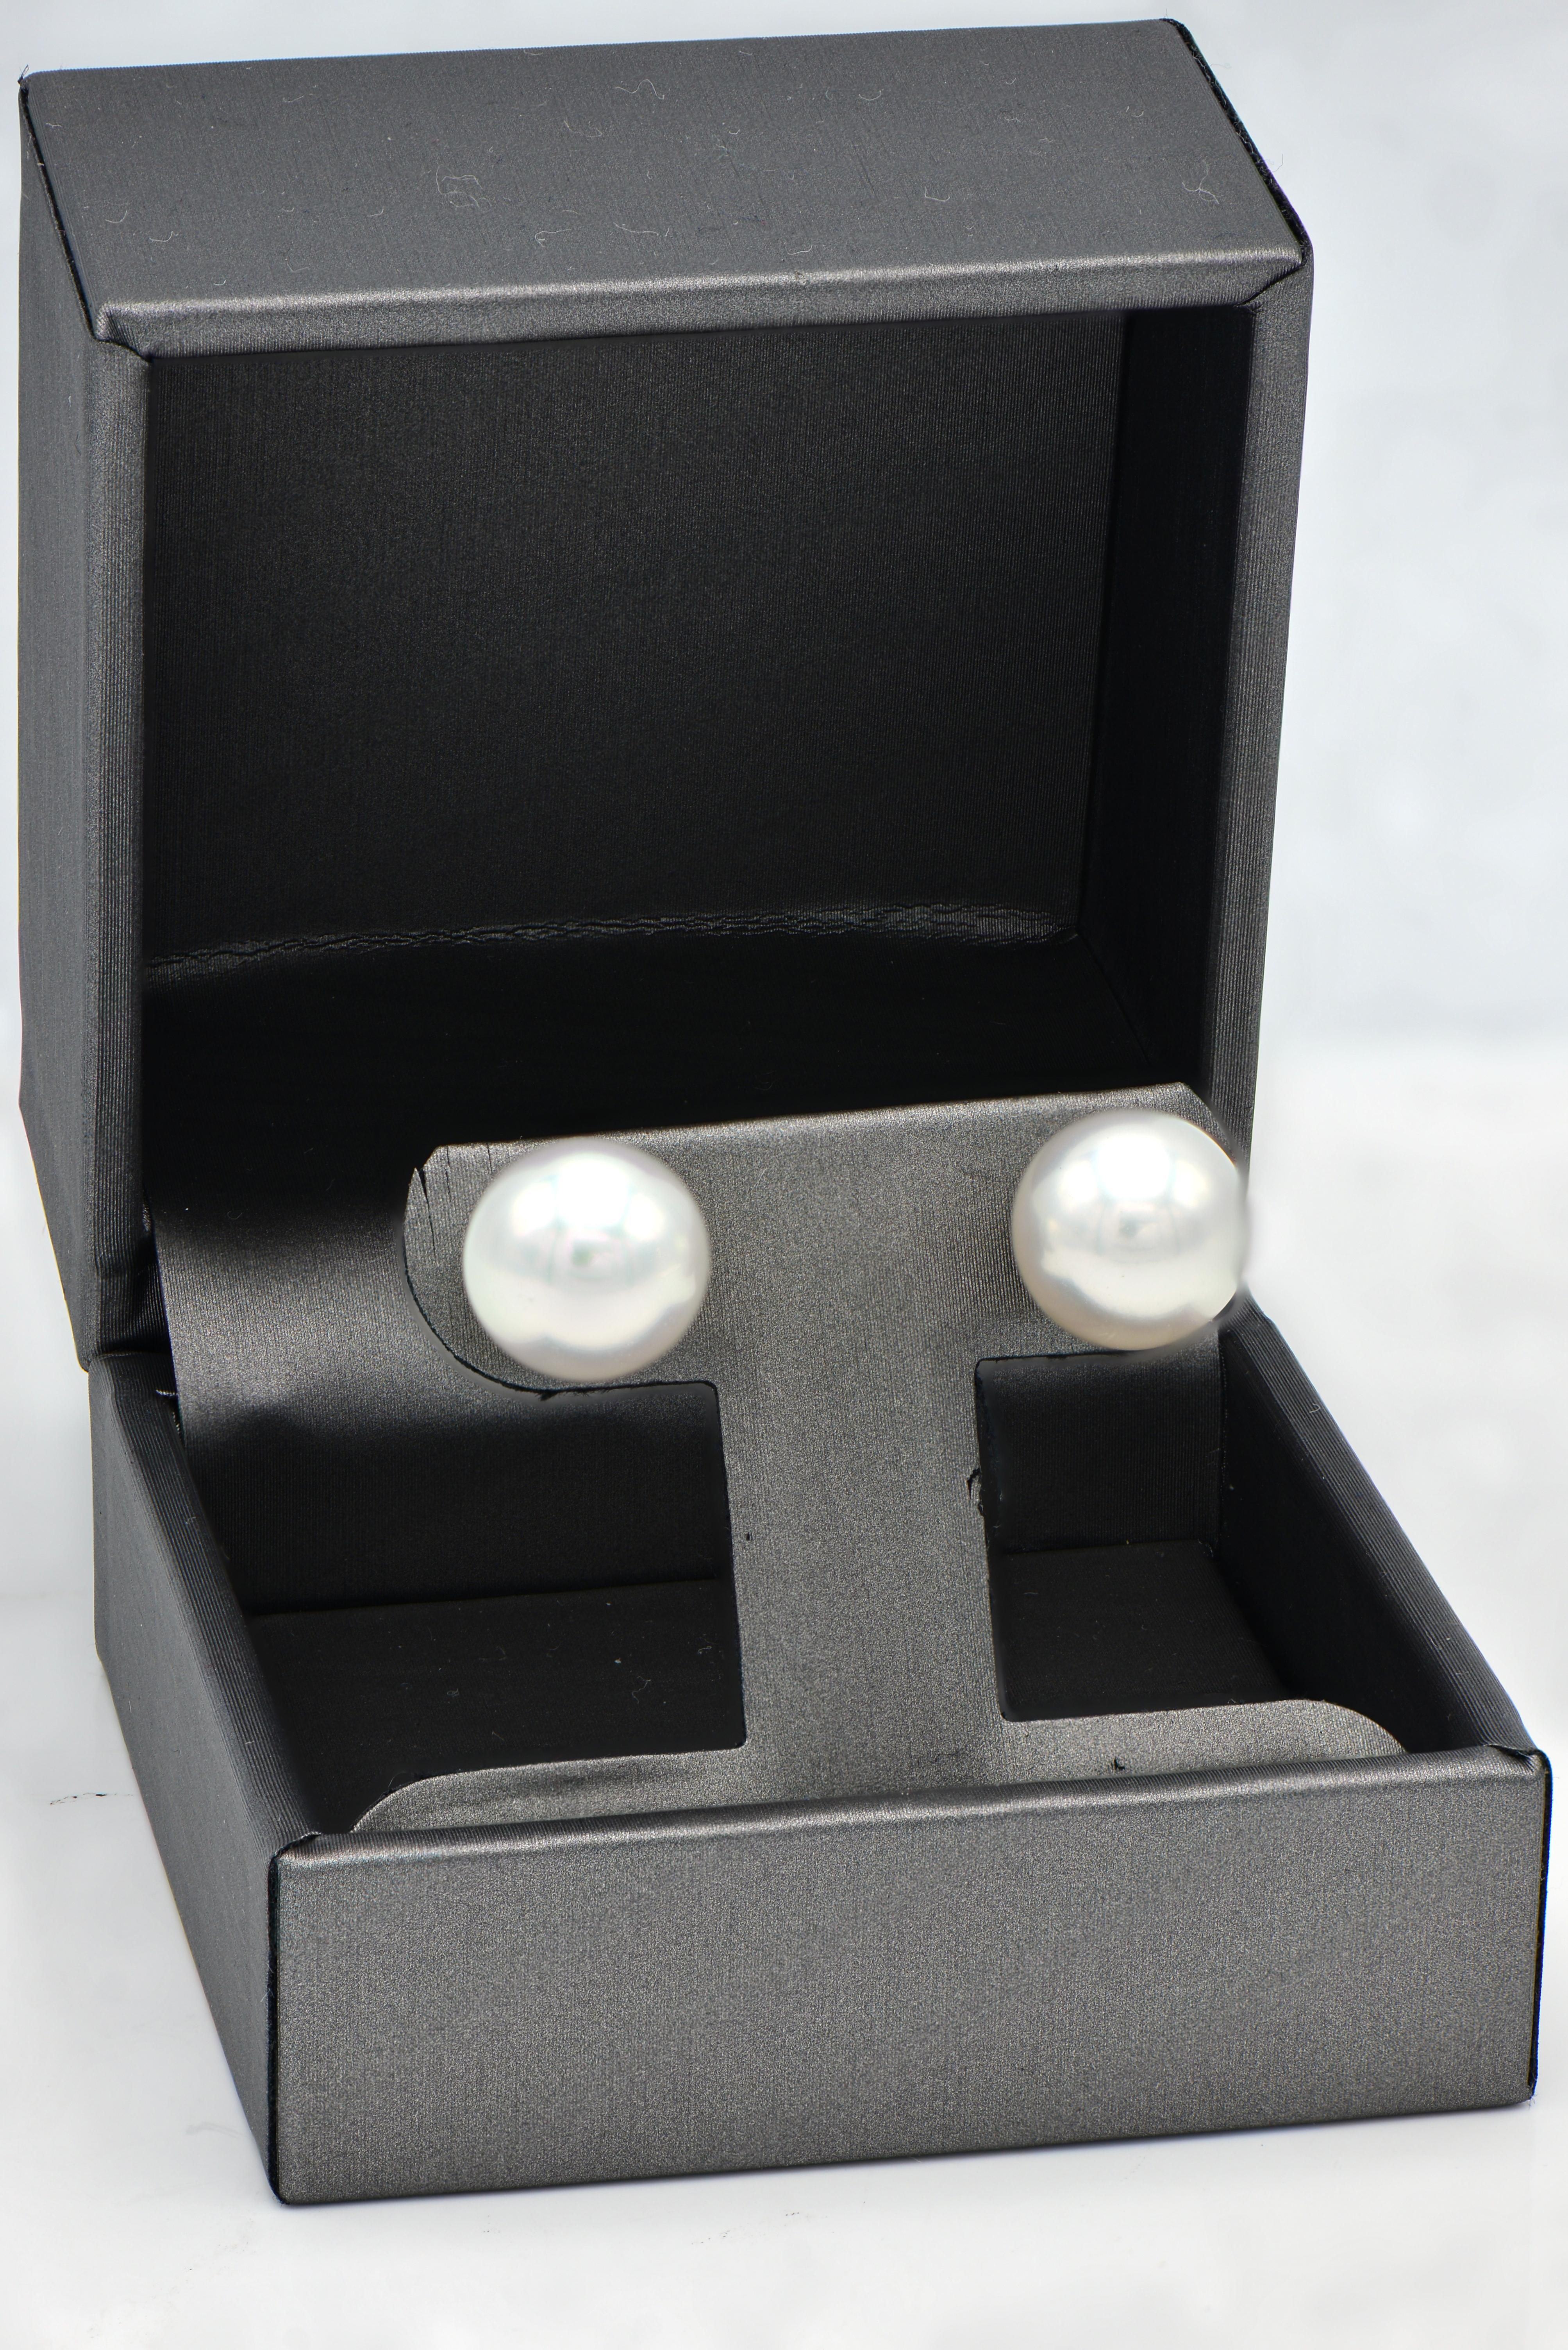 South Sea Pearl Stud Earrings are a classic and timeless piece of jewelry that should be owned by everyone. South Sea studs are slightly larger than cultured pearl studs for a bigger more sophisticated look. These 10-10.5mm South Sea Pearl Studs are